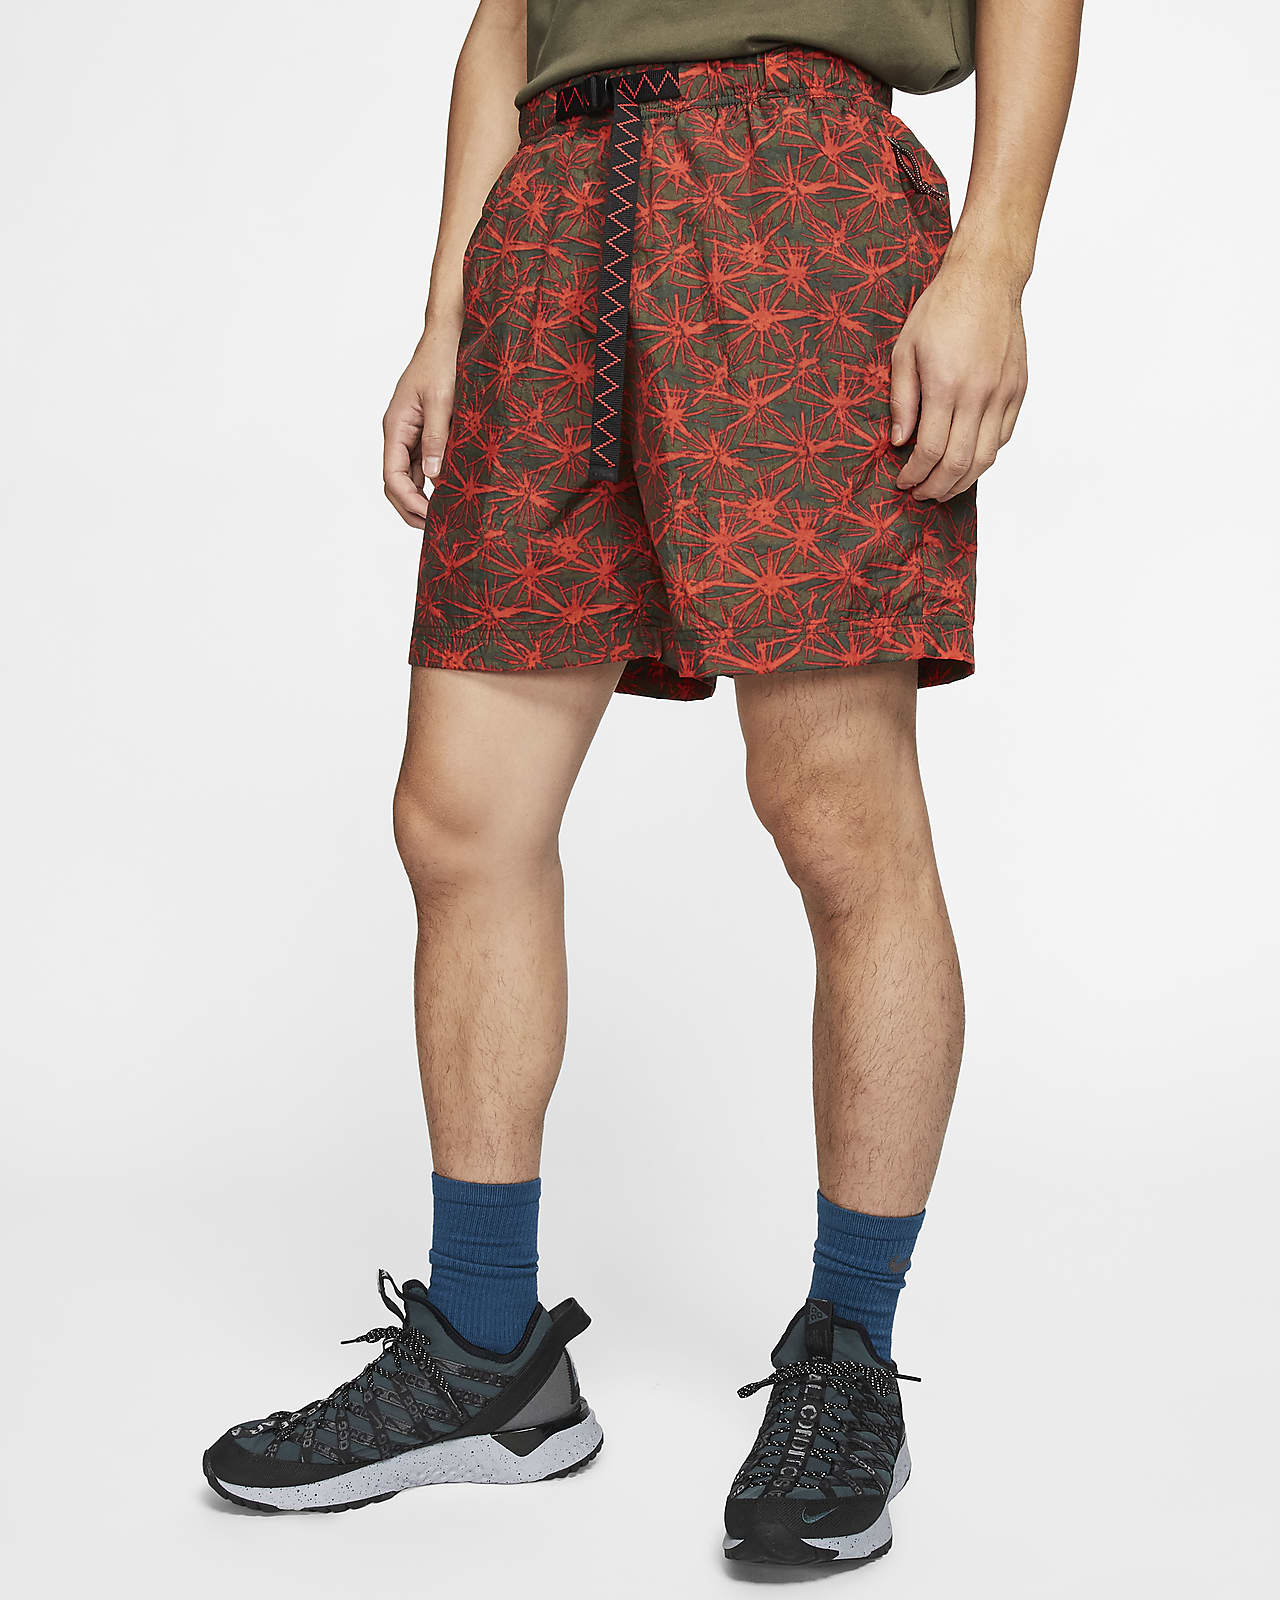 nike red woven shorts